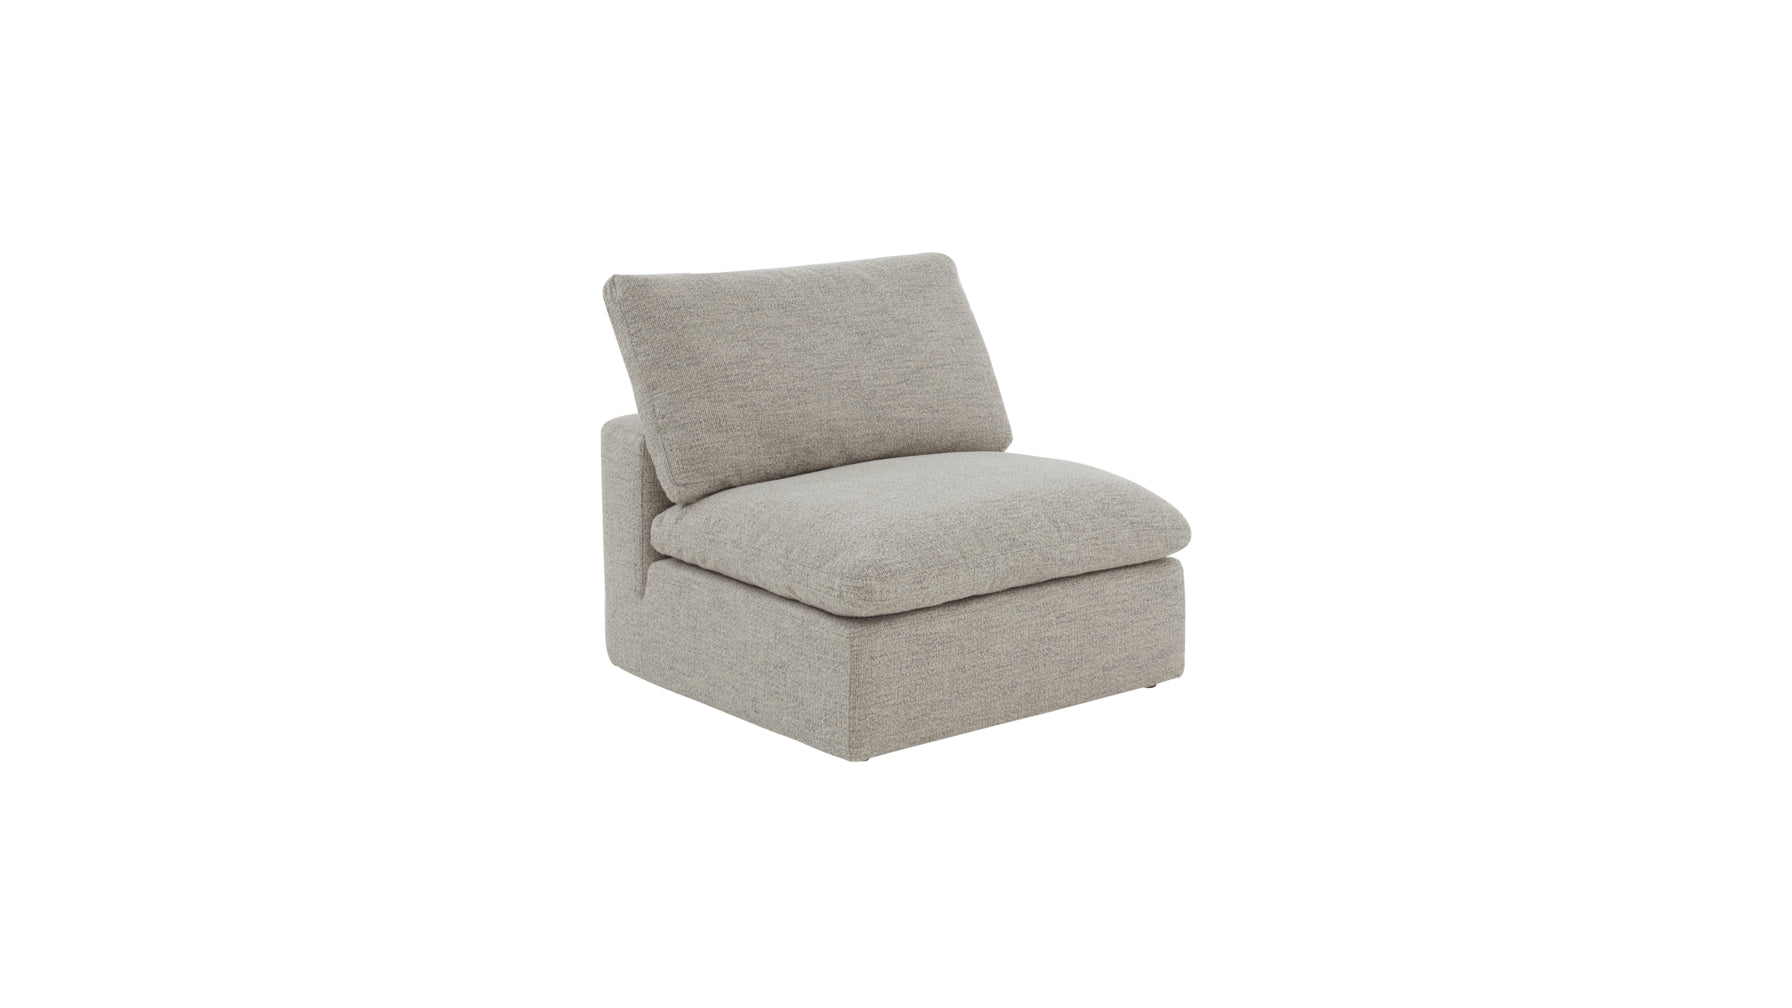 Movie Night™ Armless Chair, Large, Oatmeal - Image 2